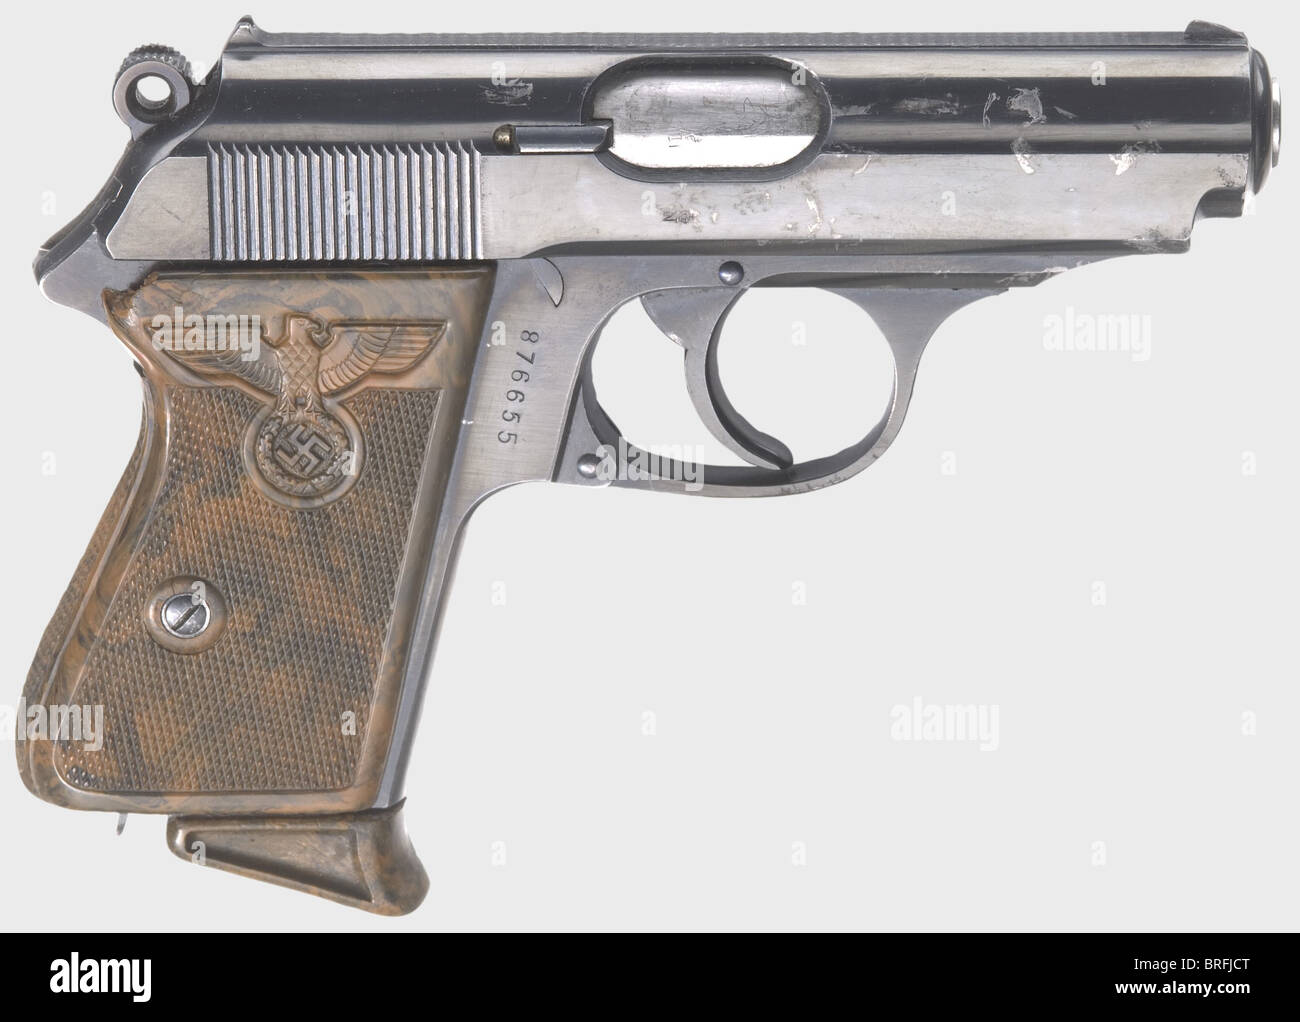 A Walther PPK ZM,PL,'Ehrenwaffle des Politischen Leiters'/arma onoraria del leader politico, calibro 7.65 mm, n. 876655.mirrorlike bore.90ø-safety.Production year 1937/38.Proof-marking Crown/'N'.Standard iscrizione su slide.originale high-gloss bluing,front right on slide pochi spot bianchi blish party.Small marg su entrambi i lati.Small plum blish Right.Correct magazine con solo banner Walther e marrone extension.Very buona a come nuova condition.Erwerbsscheinpflicht,Additional-Rights-clearences-not available Foto Stock